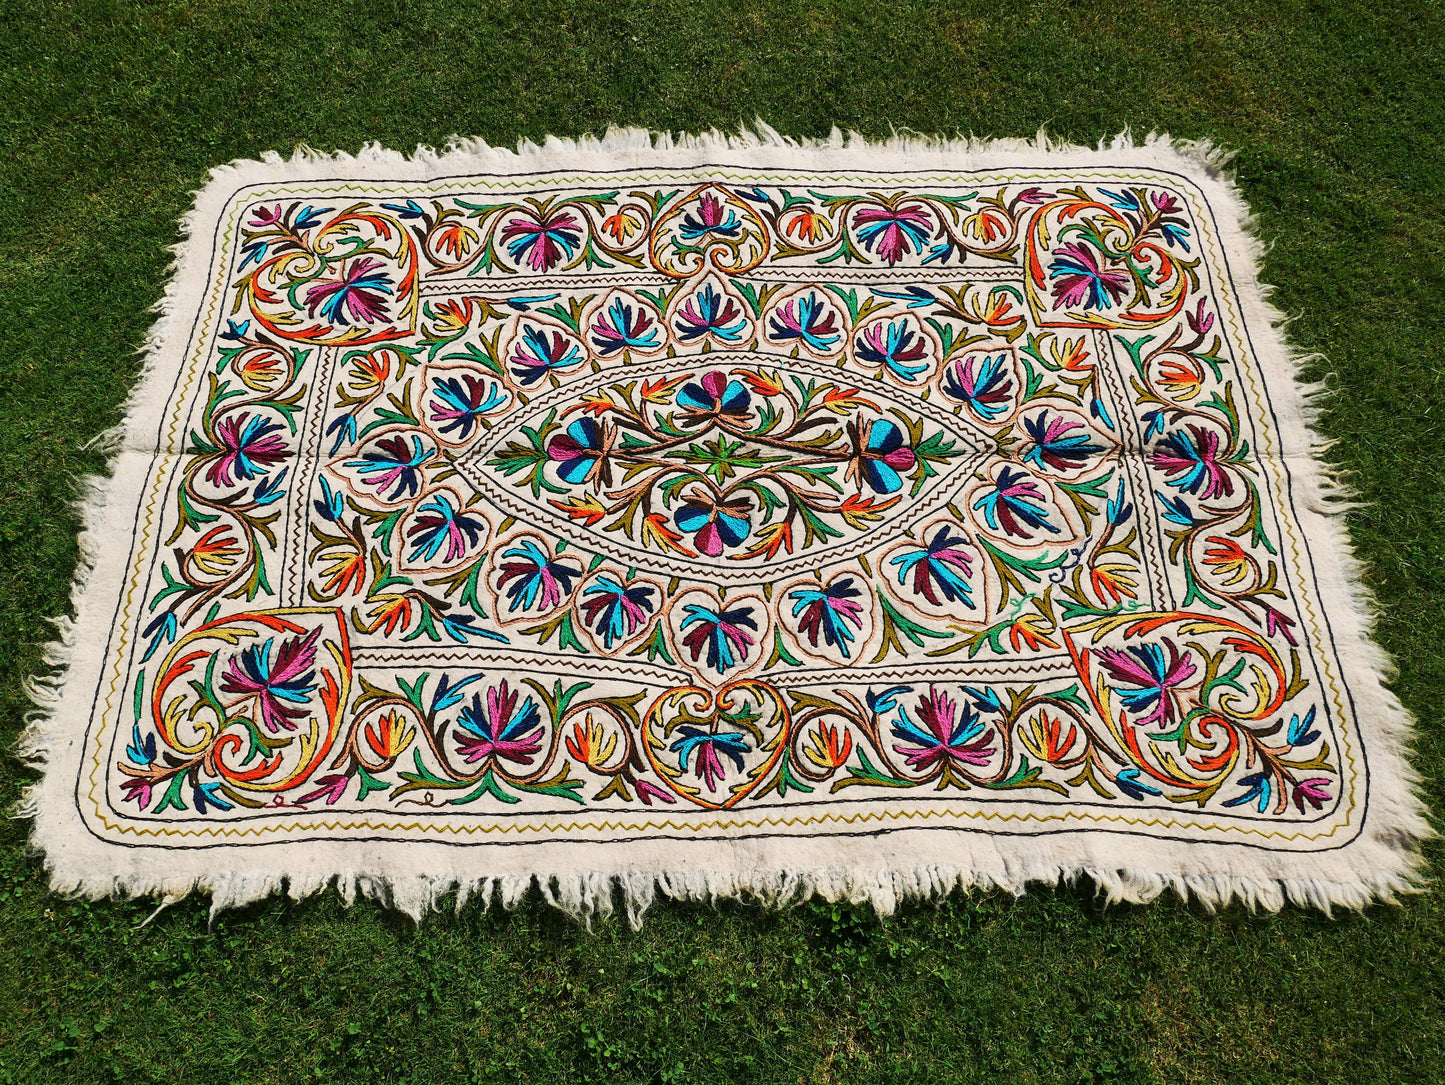 Hand-Felted 7x5 Wool Rug "Namda" from Kashmir - Unique Floral Embroidery on Sheep Wool Felt Base - Boho Decor for Cozy Floors and Artful Corners